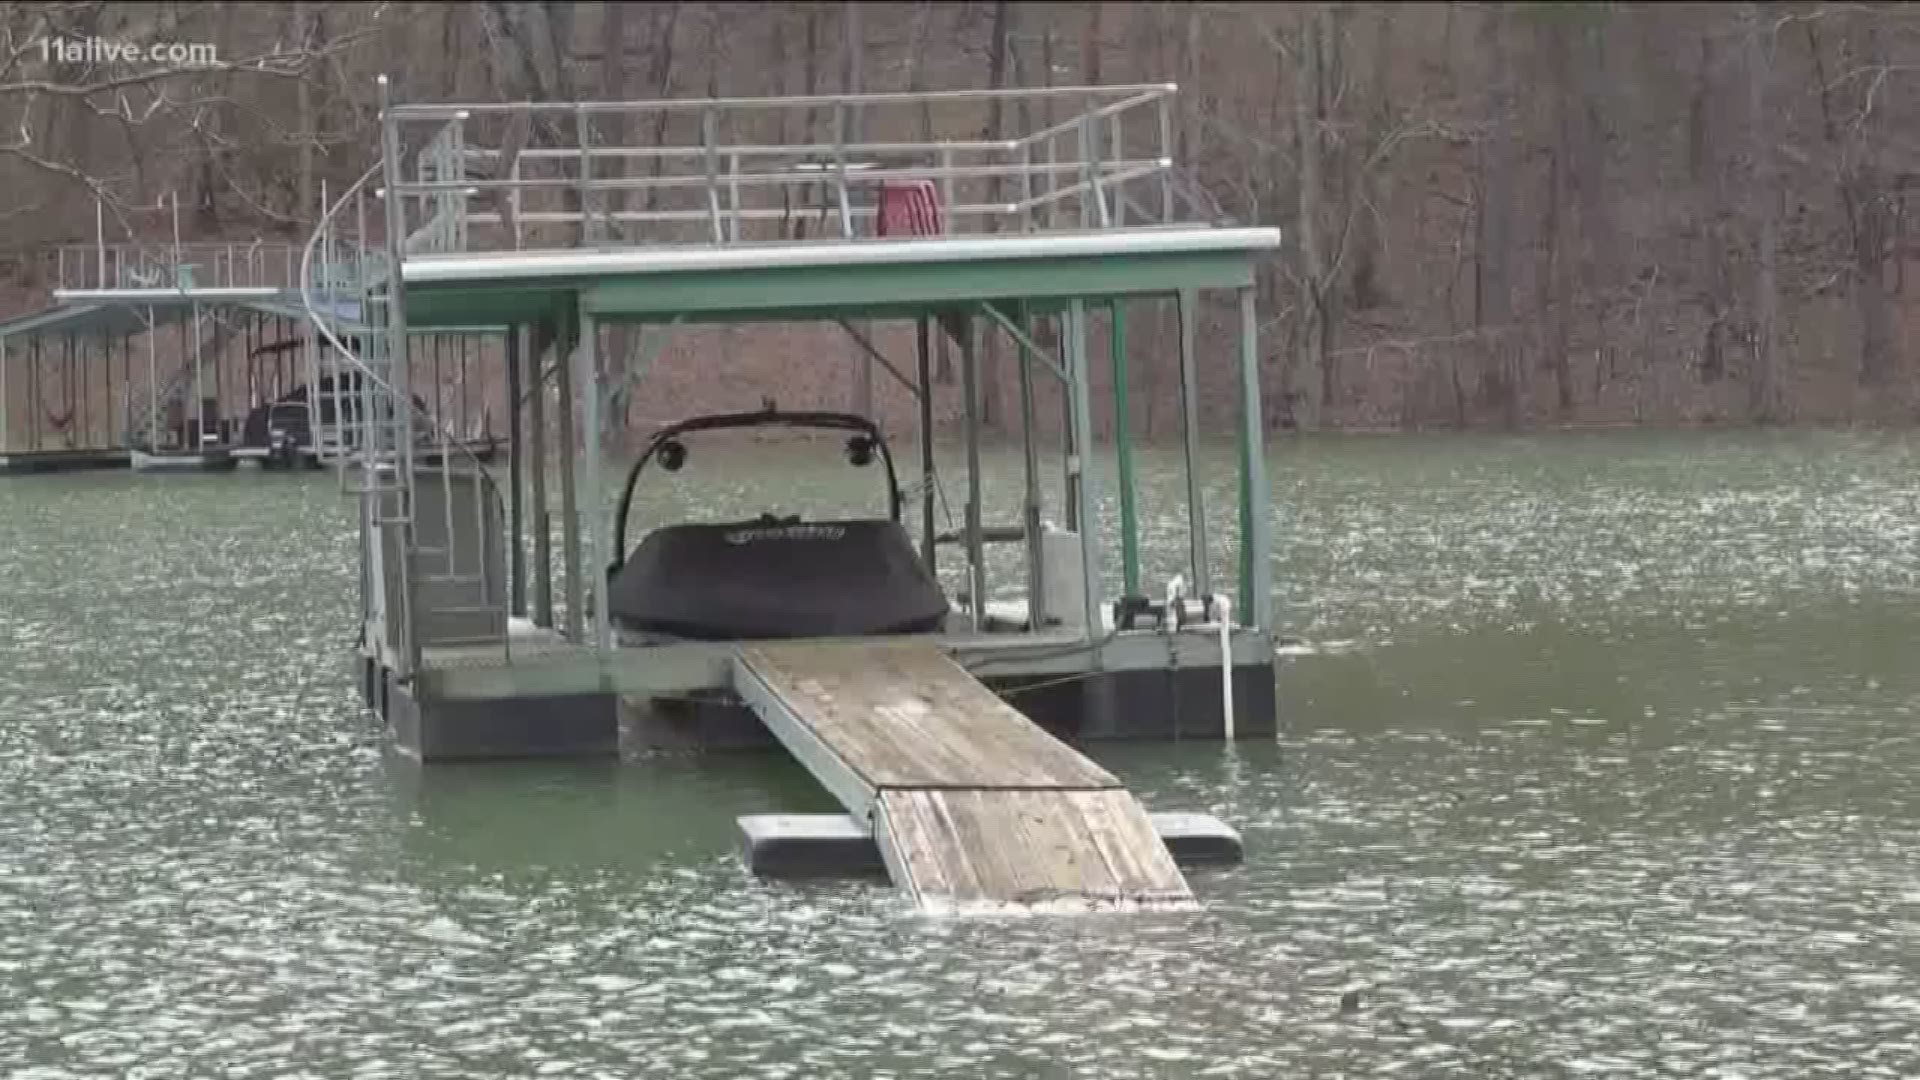 Lake Lanier reaches highest water levels since 1977